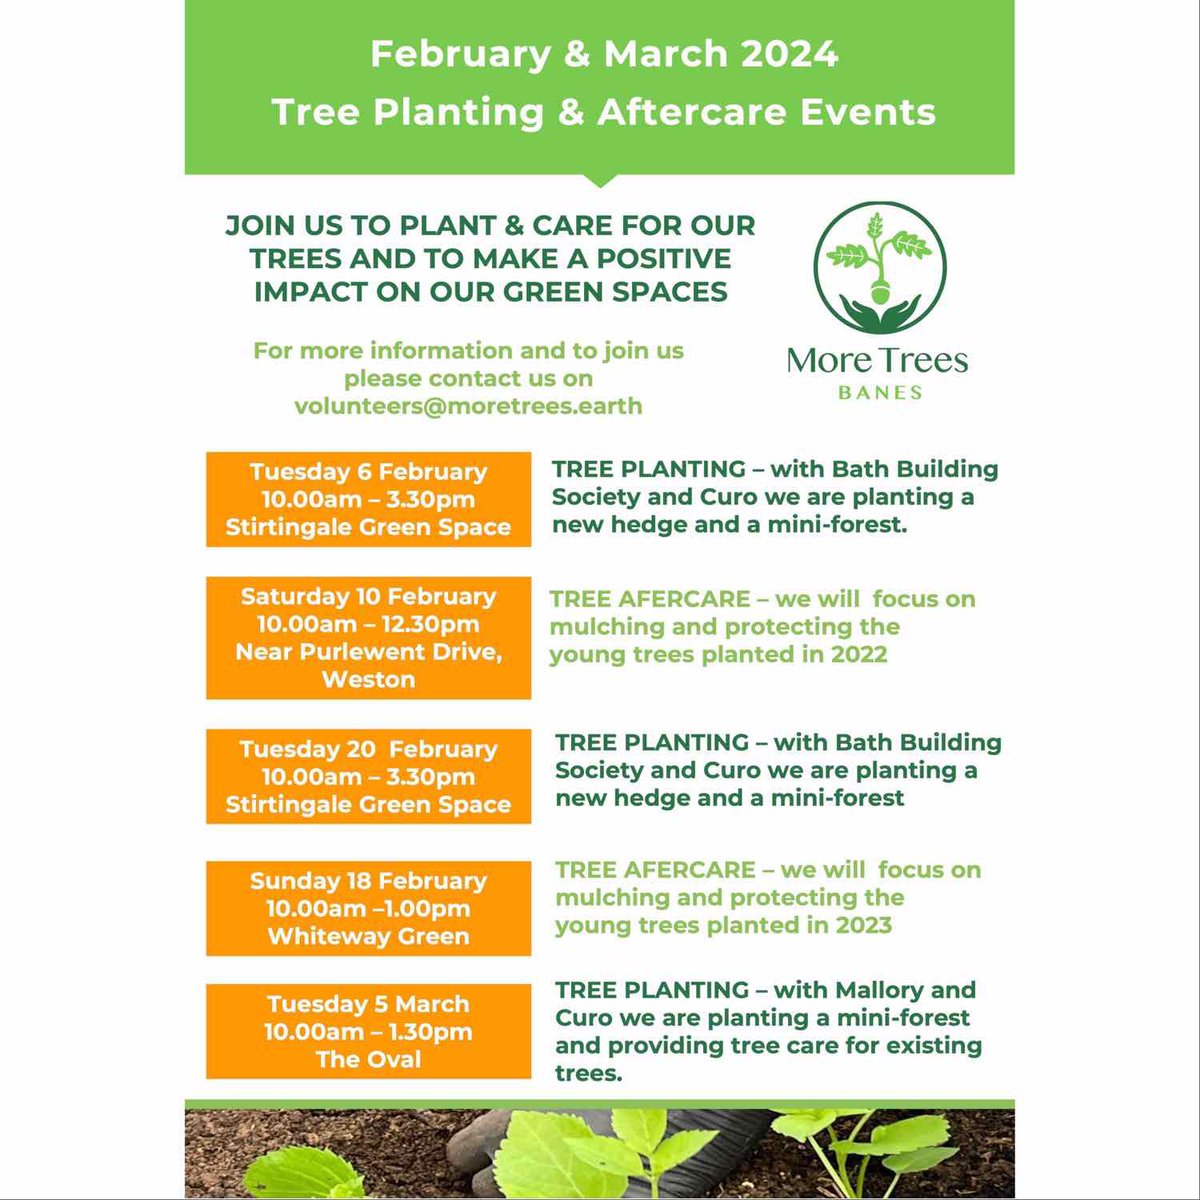 Come & join us! 👇🌿🌳💚 ✉️ volunteers@moretrees.earth